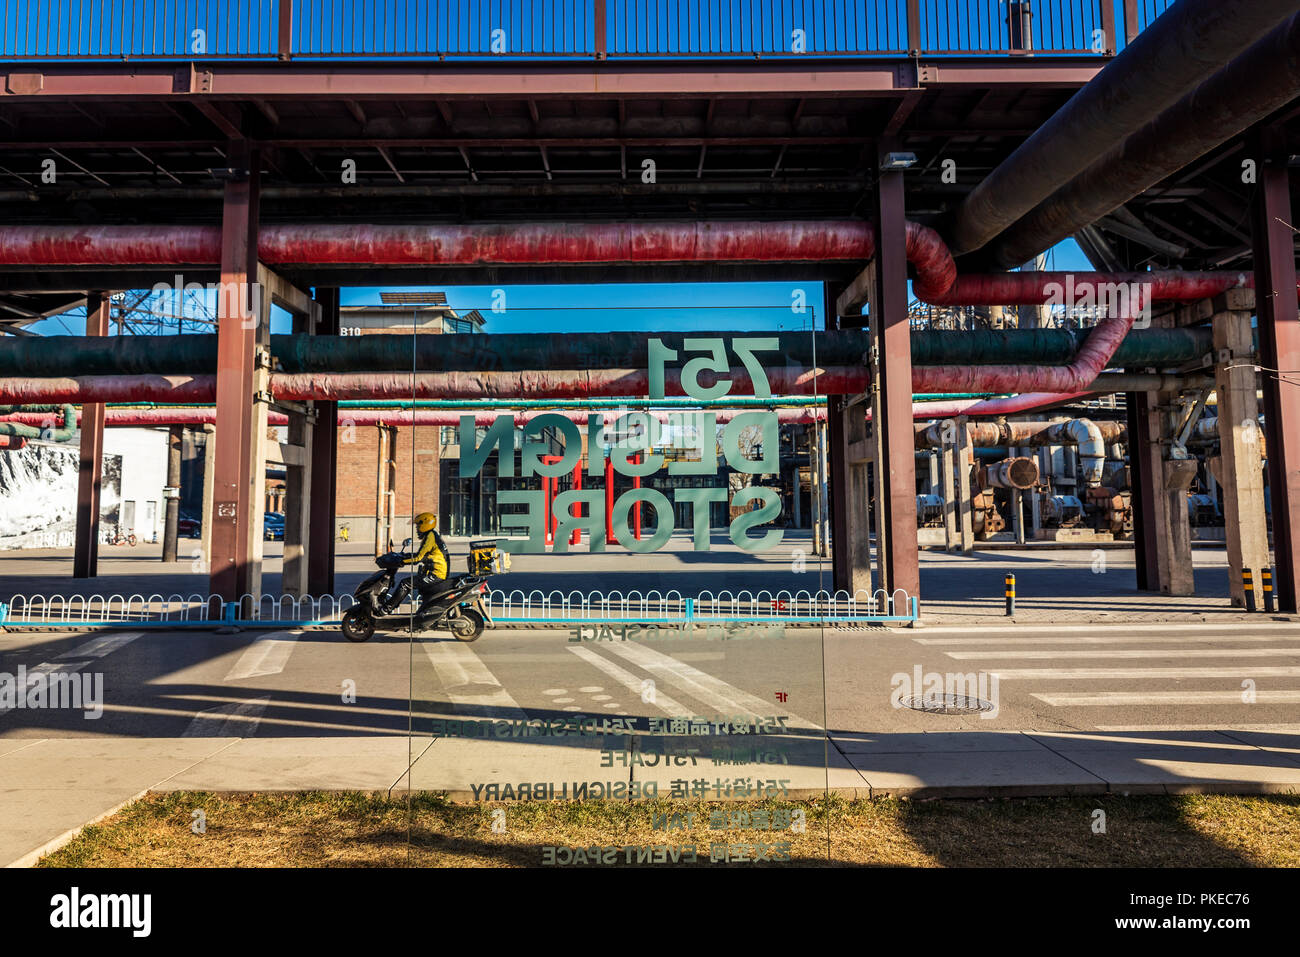 Factory 798 or Dashanzi Art District, a complex of 50-year-old decommissioned military factory buildings that houses a thriving artistic community,... Stock Photo